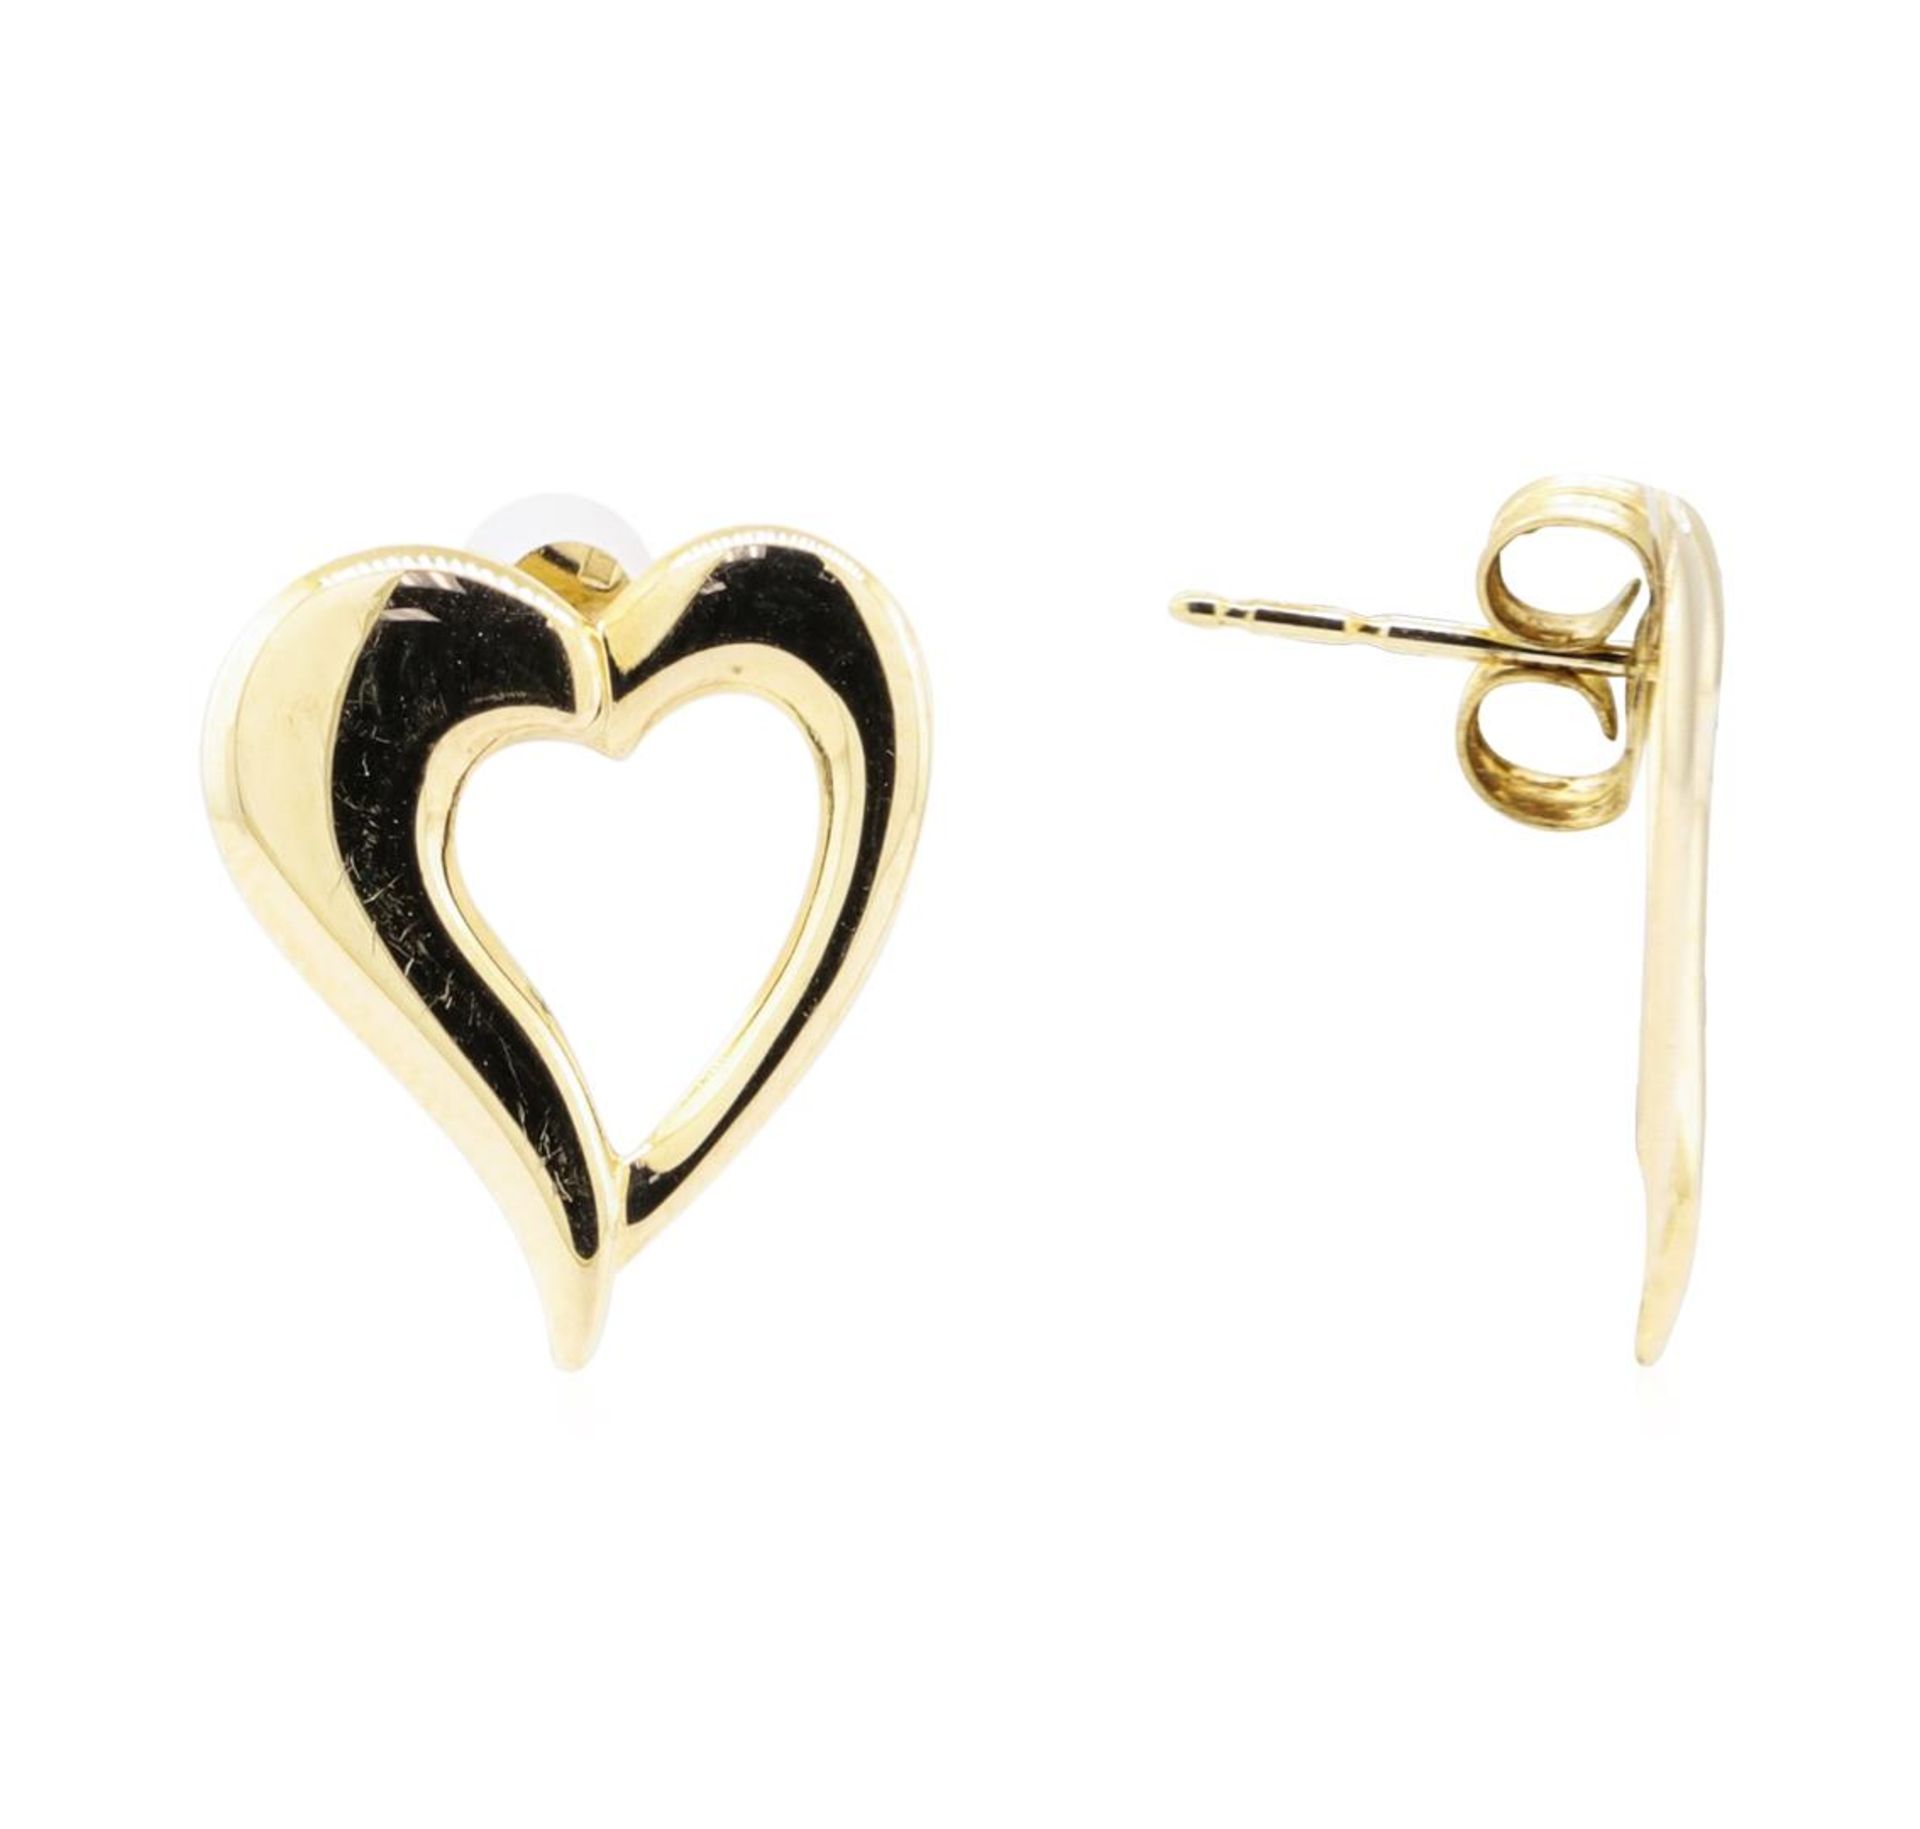 Puffed Heart Earrings - 14KT Yellow Gold - Image 2 of 2